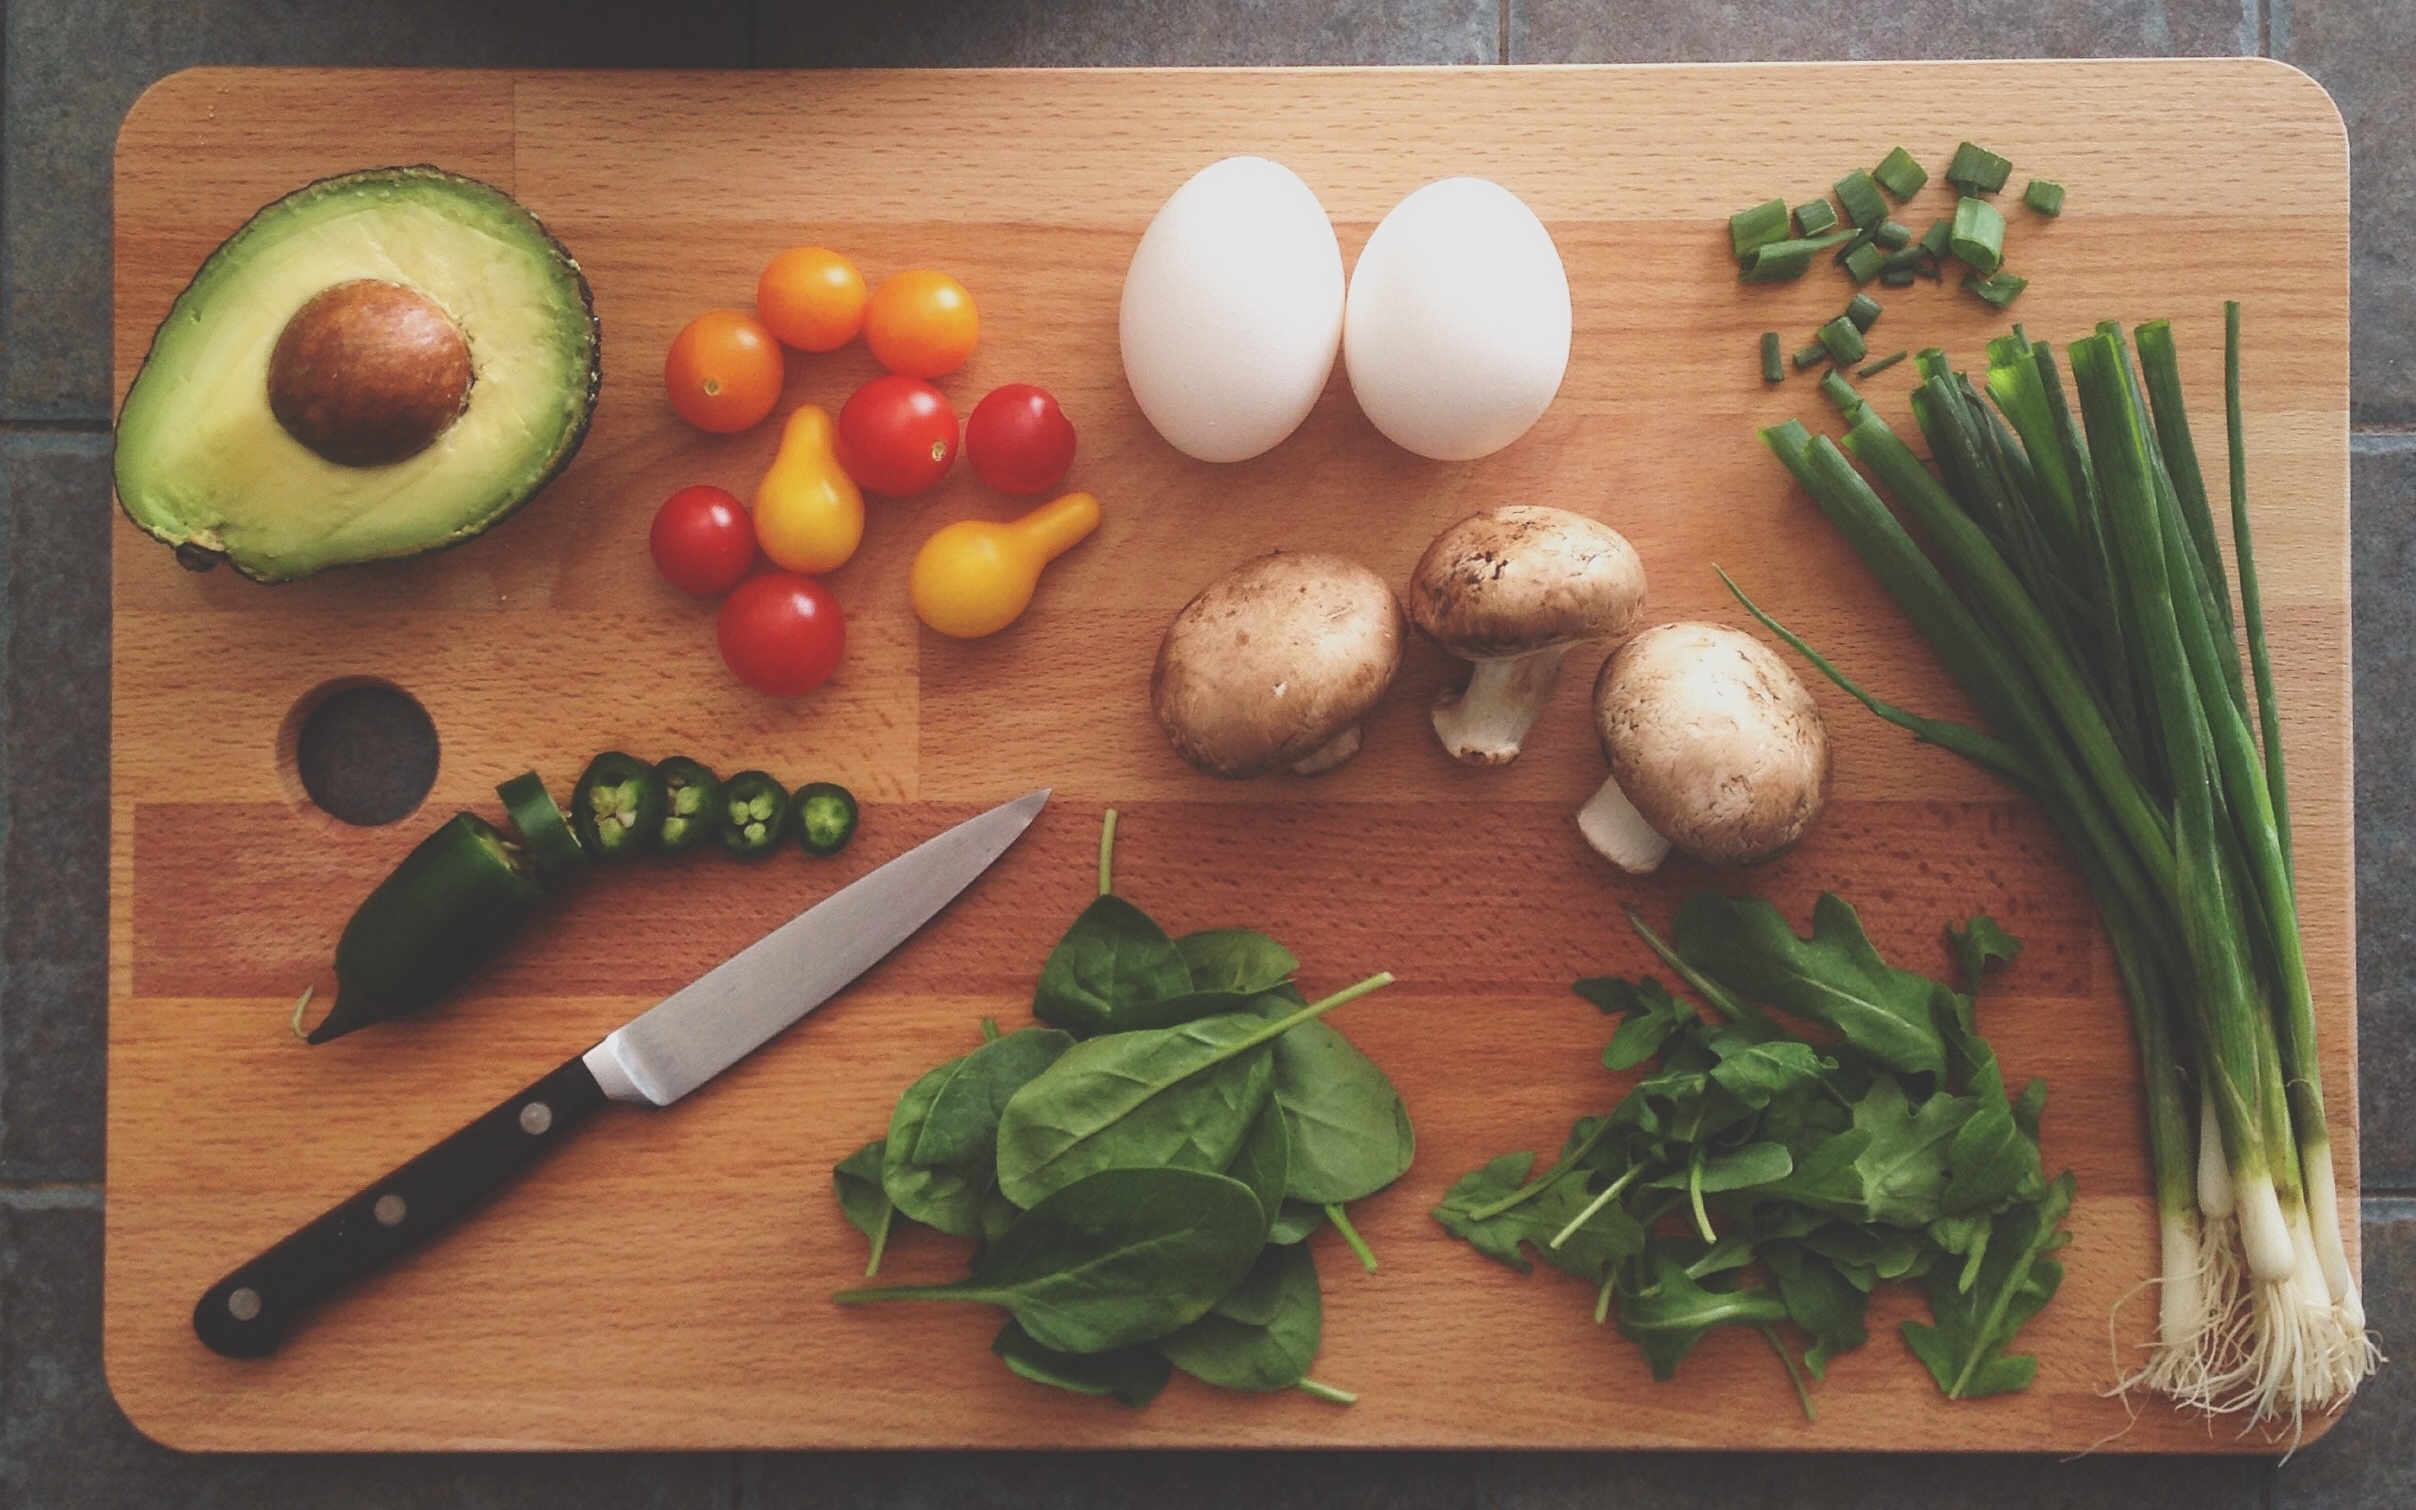 Wooden chopping board with a selection of cut up vegetables - half an avocado chilli, spinach, tomatoes, mushrooms, spring onions, salad leaves and mushrooms.